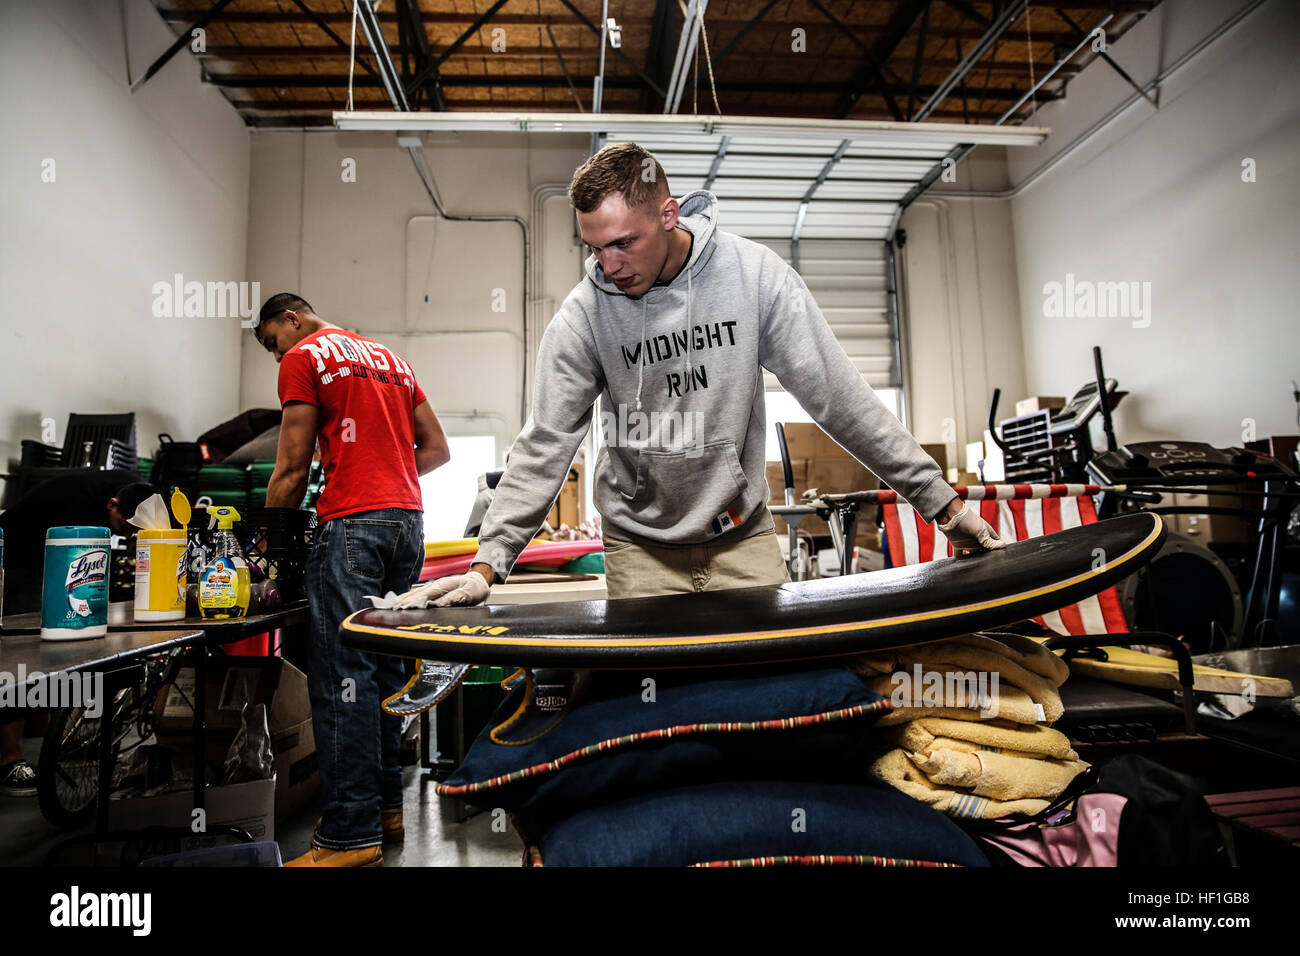 Lance Cpl. Taylor Bukoski, telephone systems and personal computer intermediate repairer, 15th Marine Expeditionary Unit, cleans a surfboard during a volunteer event at The Angel’s Depot in Vista, Calif., Sept. 26. All donations go to improving the quality of life for senior citizens. Bukoski, 21, is from Wanaque, N.J. (U.S. Marine Corps photo by Cpl. Emmanuel Ramos/Released) Volunteers 130926-M-ST621-001 Stock Photo